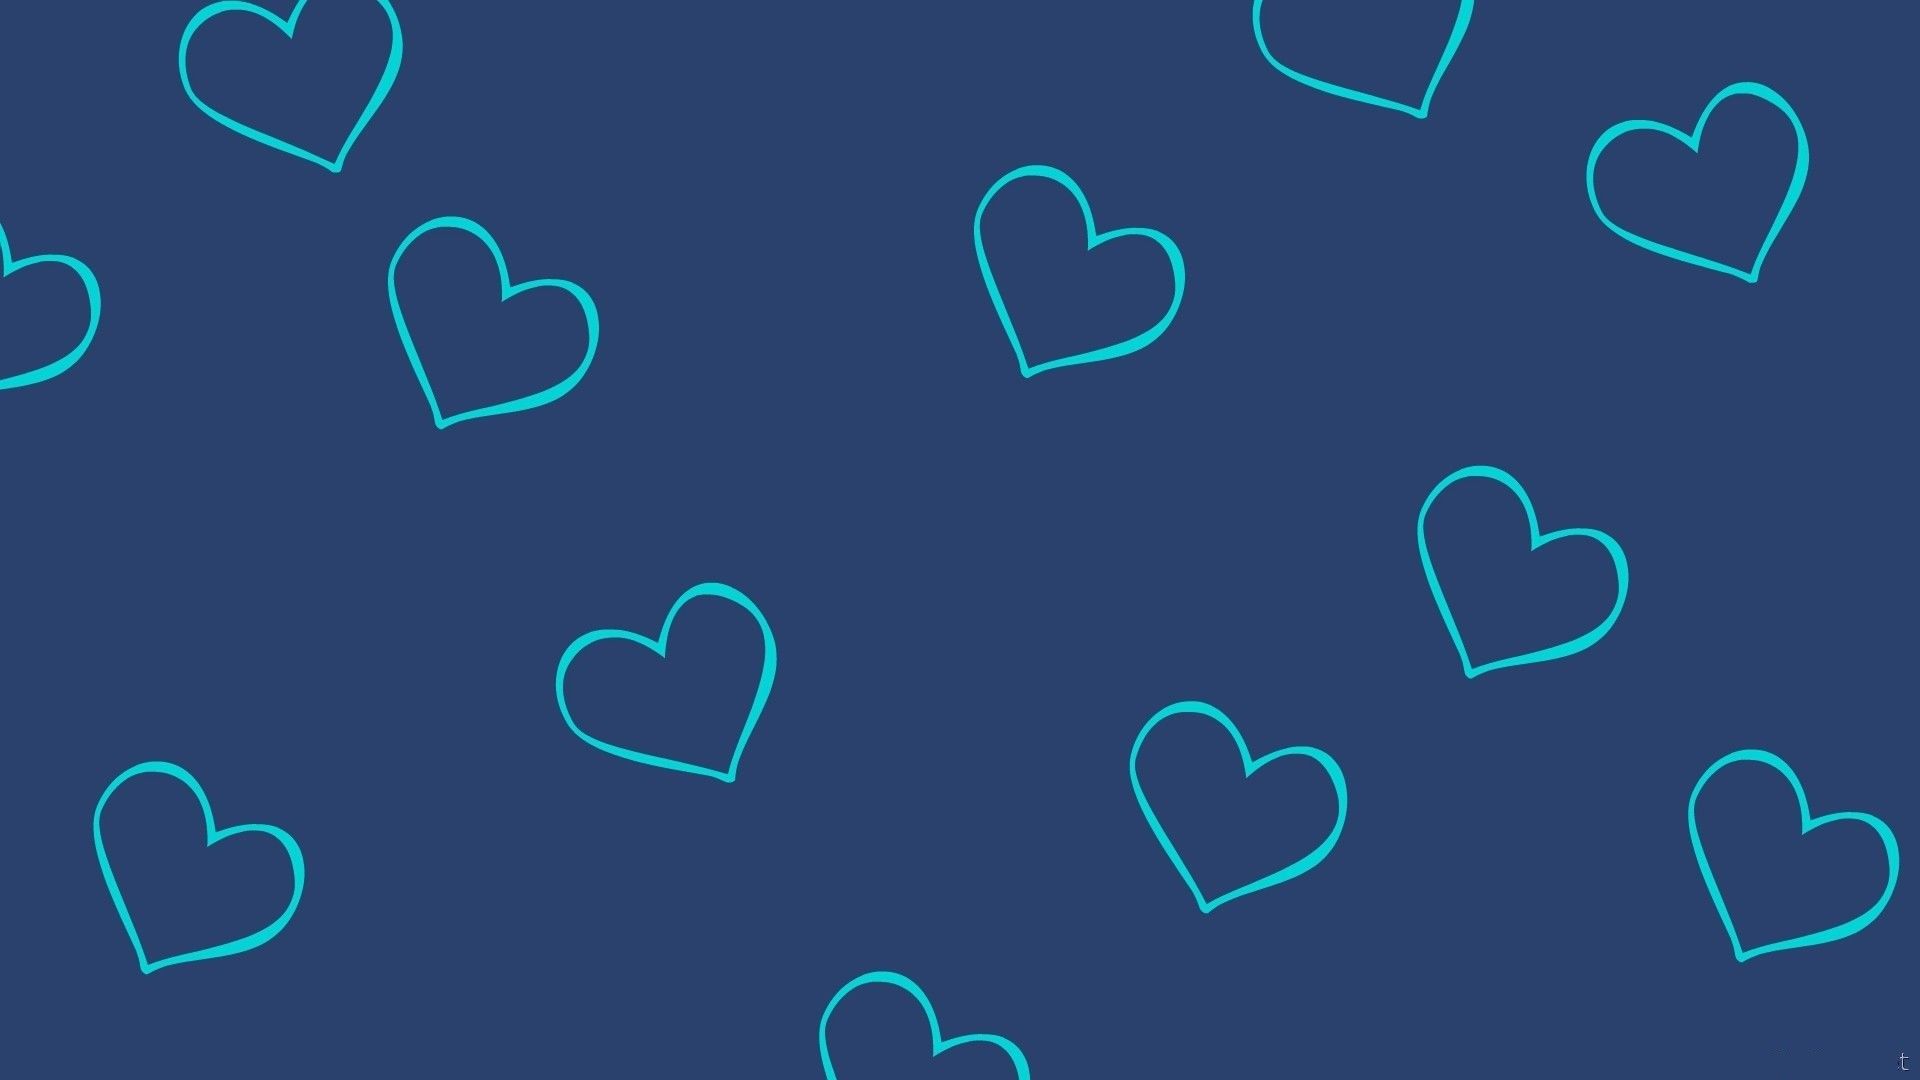 Blue hearts on a blue background - Heart